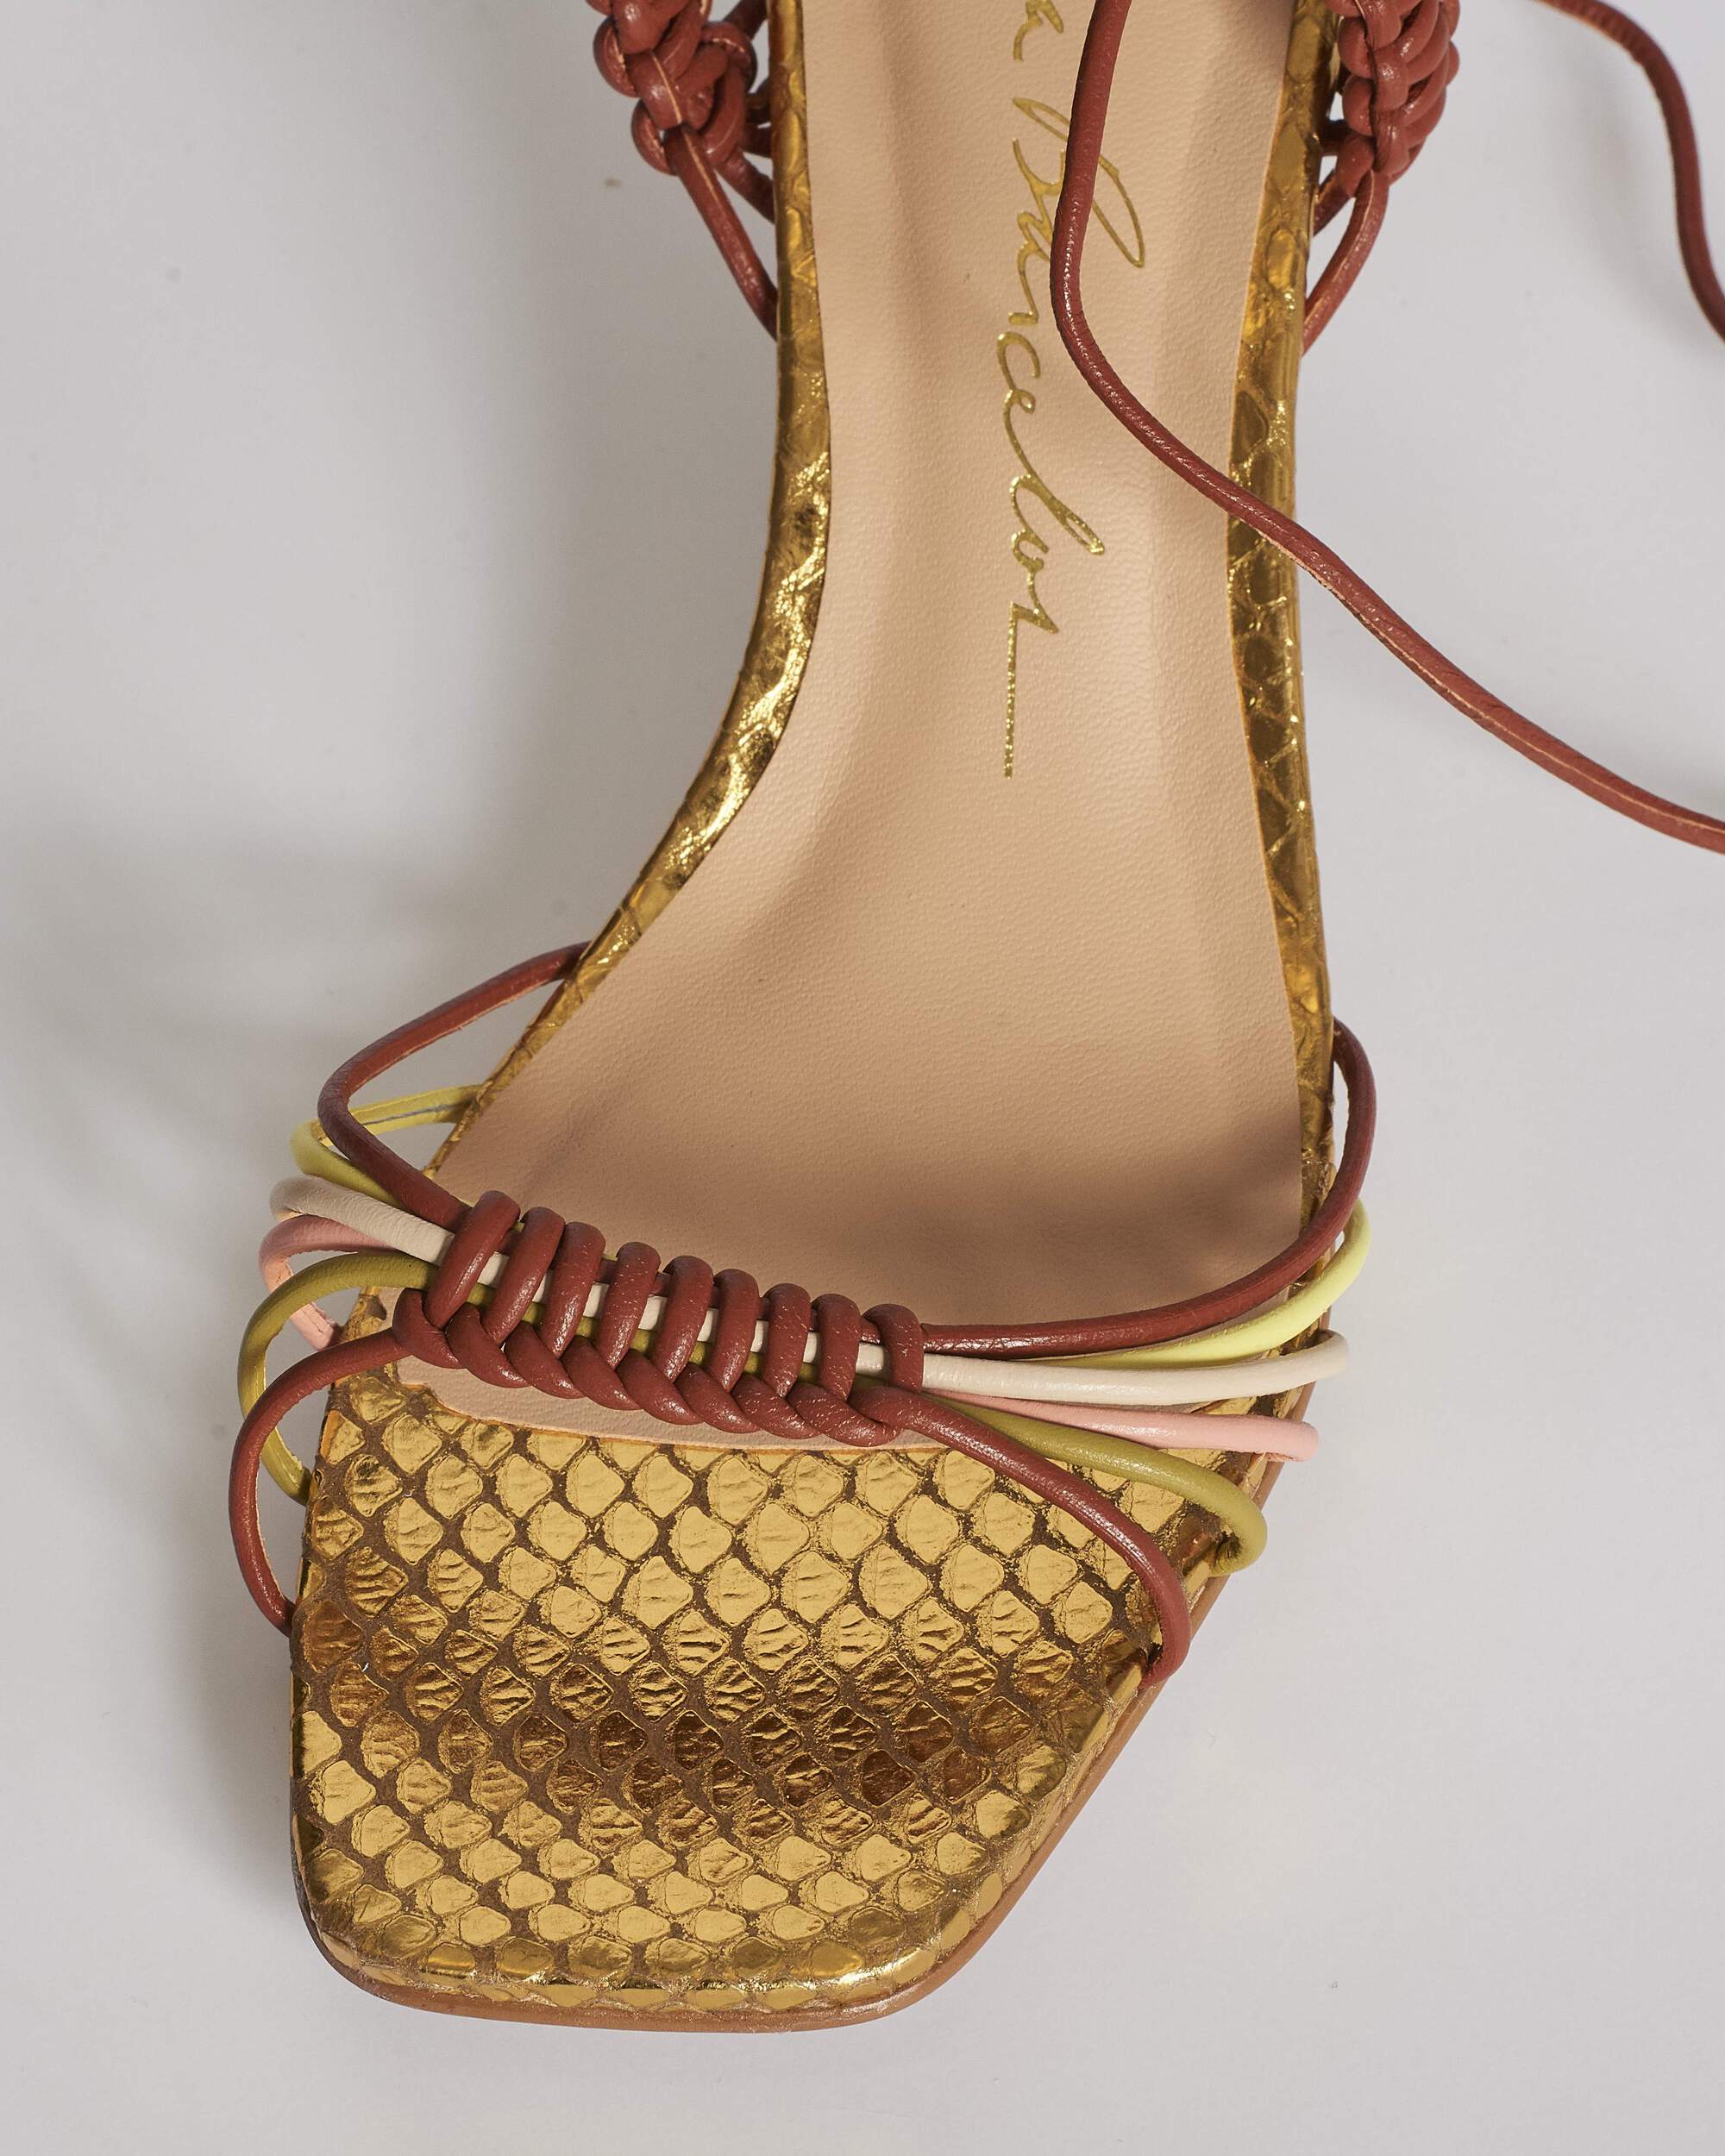 Open Toe Short Heel Wrap Gold and Brown Sandals with Multi-Color Tassels